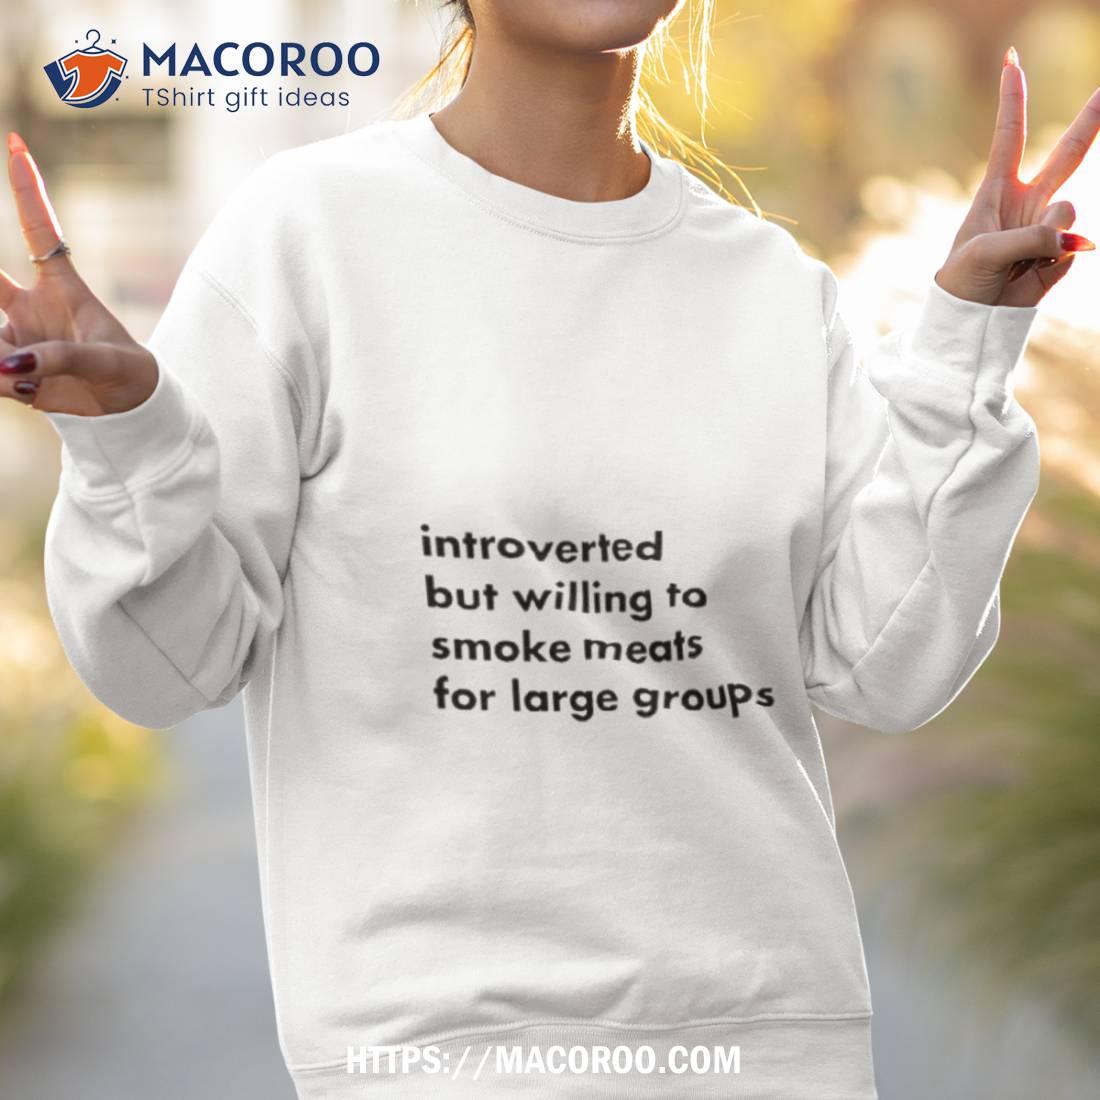 https://images.macoroo.com/wp-content/uploads/2023/09/introverted-but-willing-to-smoke-meats-for-large-groups-t-shirt-sweatshirt-2.jpg